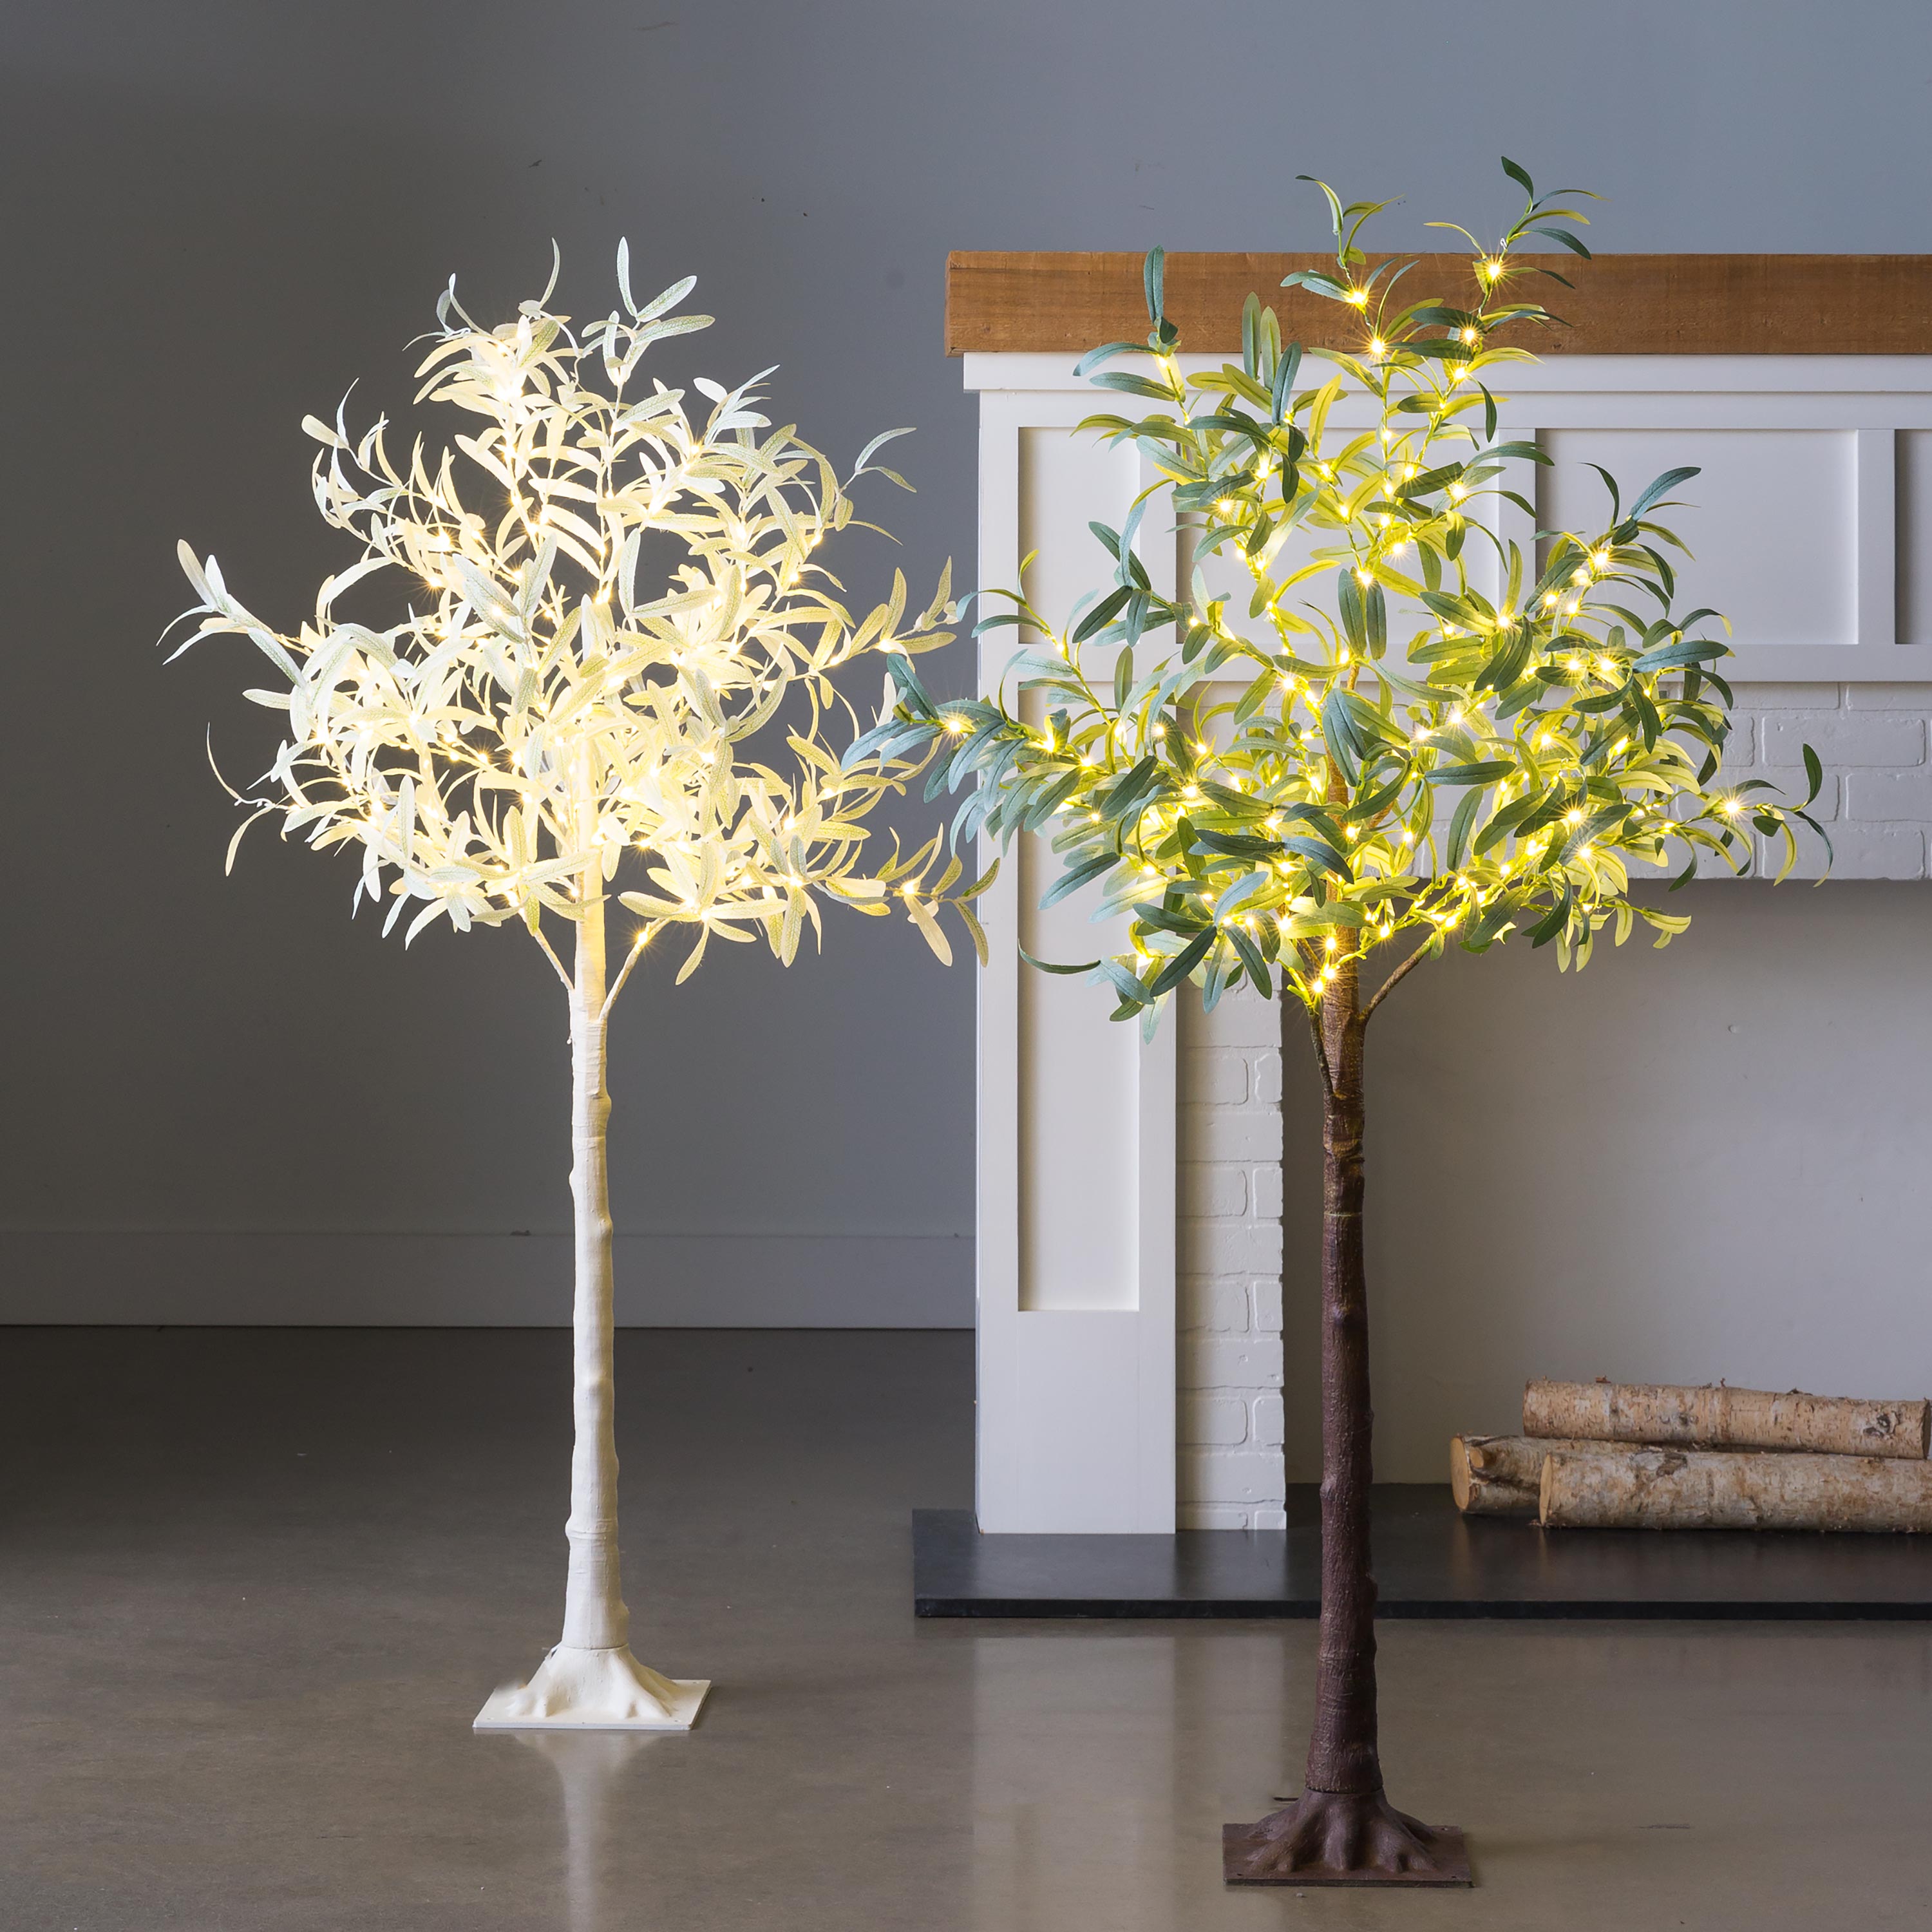 Indoor/ Outdoor Faux Lighted Olive Tree